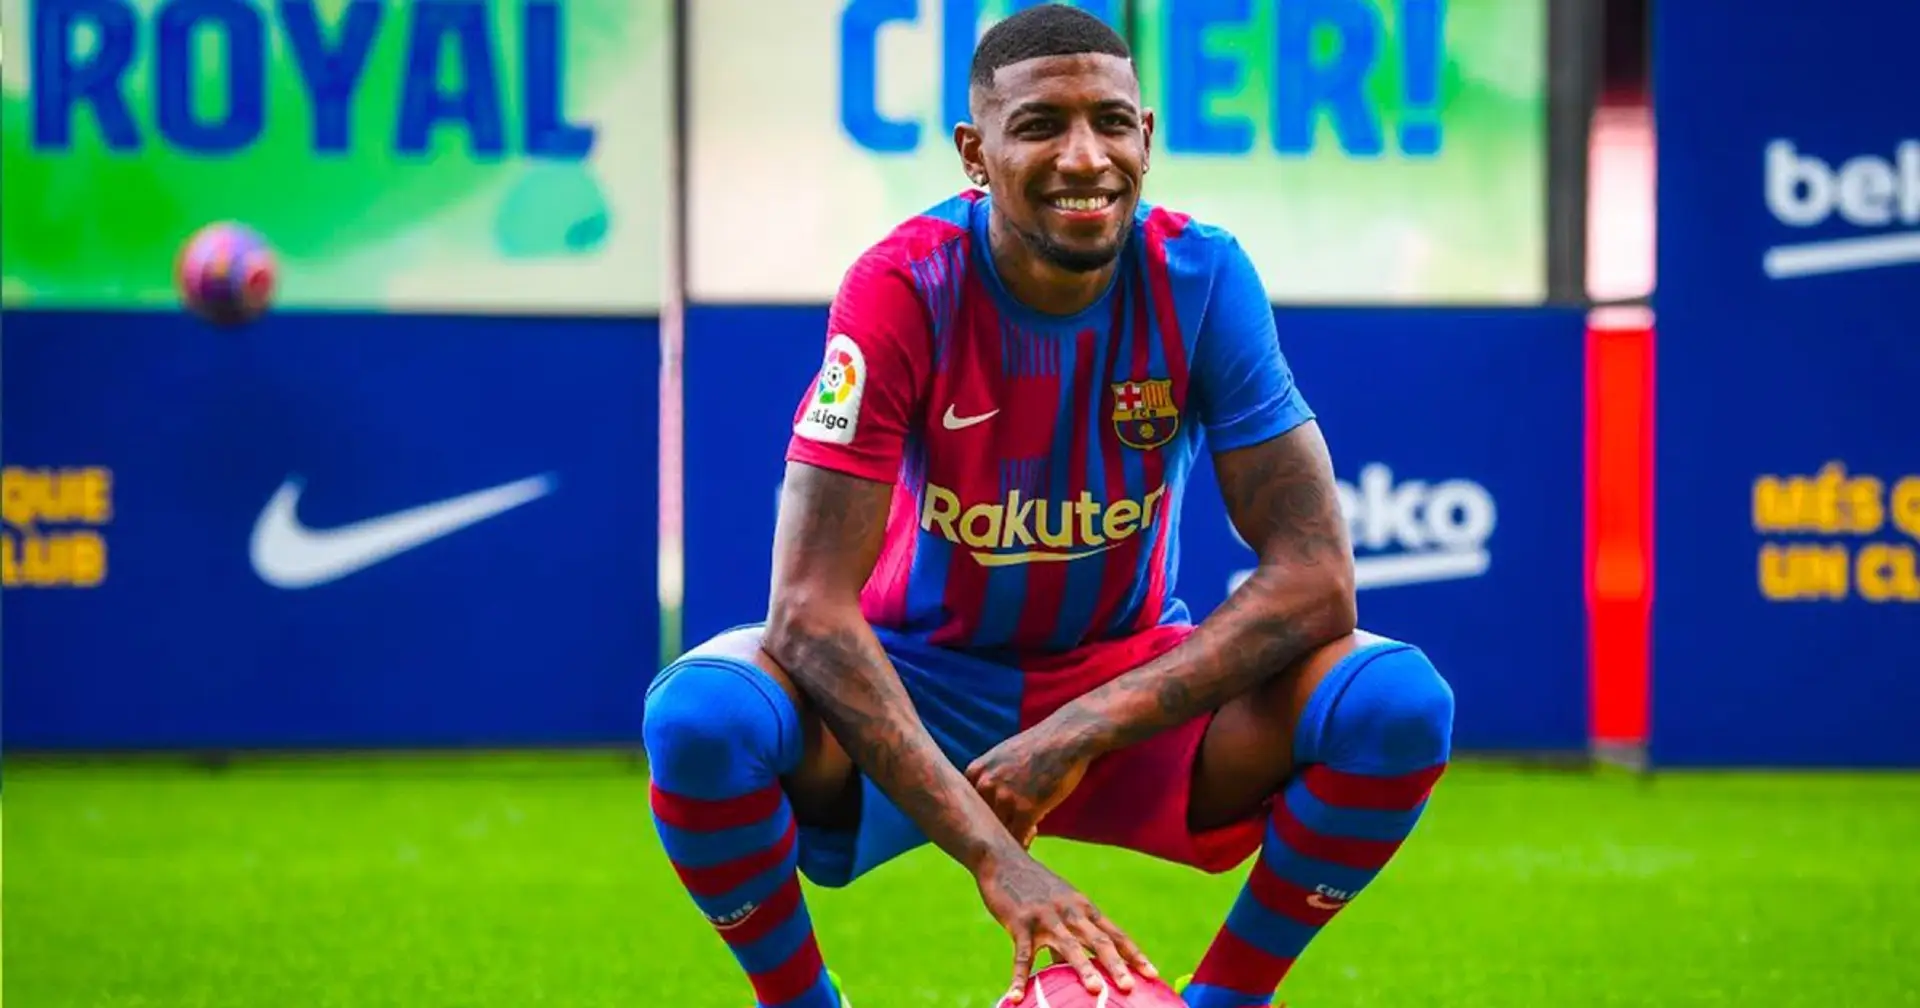 Arsenal 'wanted' to sign Emerson Royal, Barca defender opted to join Spurs instead